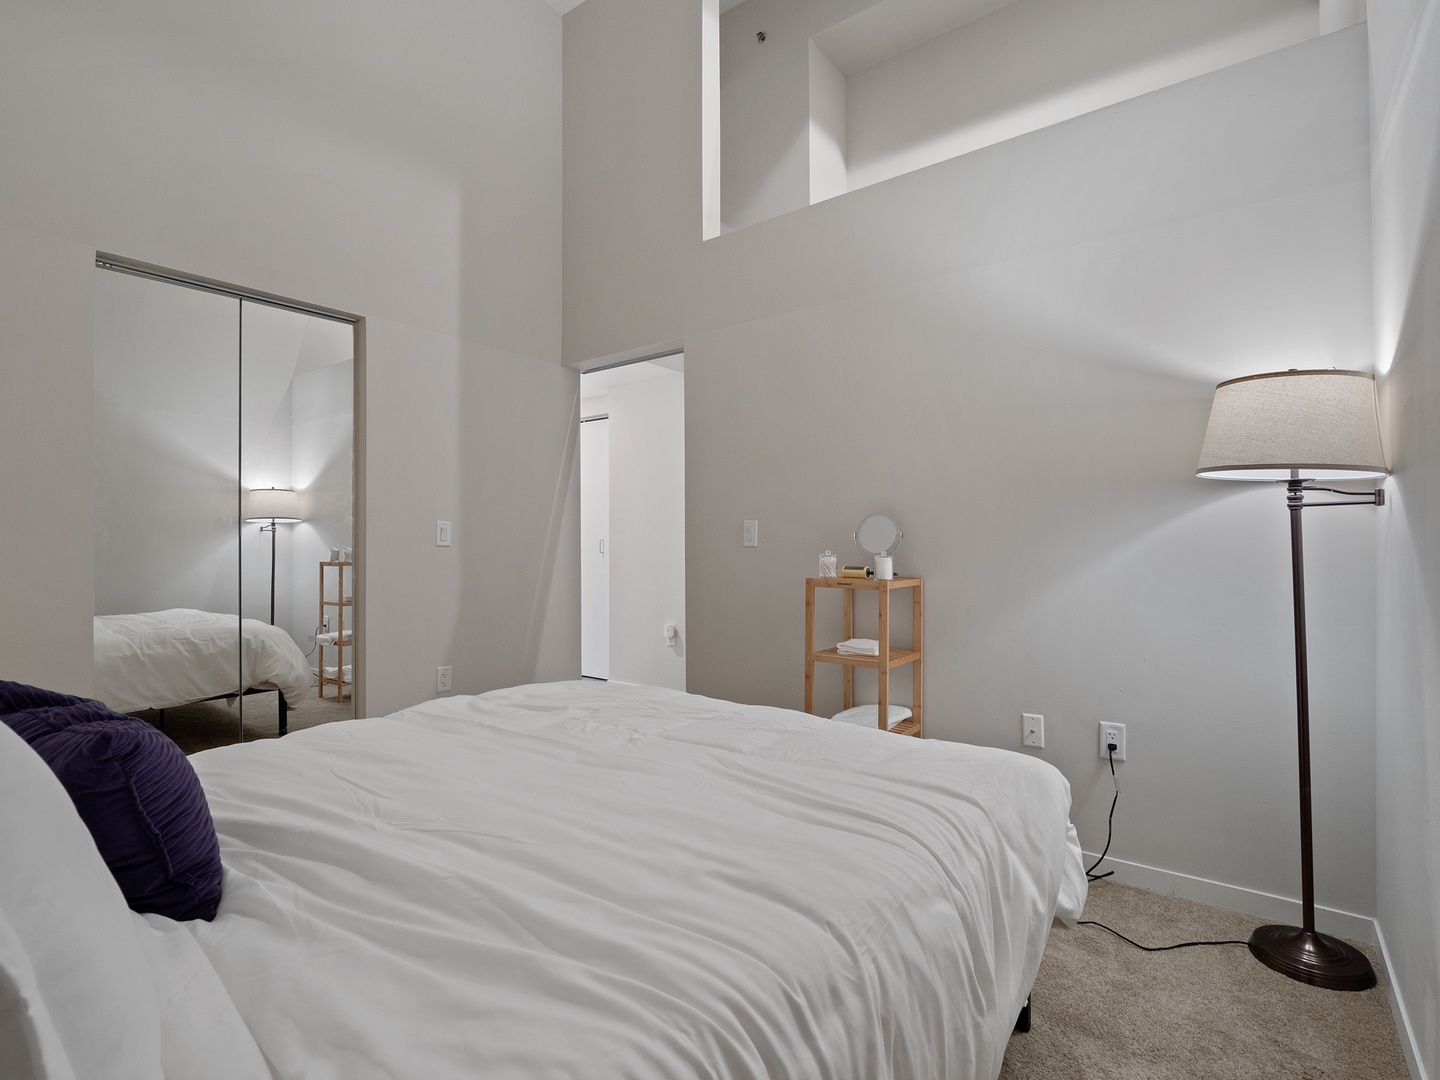 Simplicity meets sophistication in this minimalist bedroom